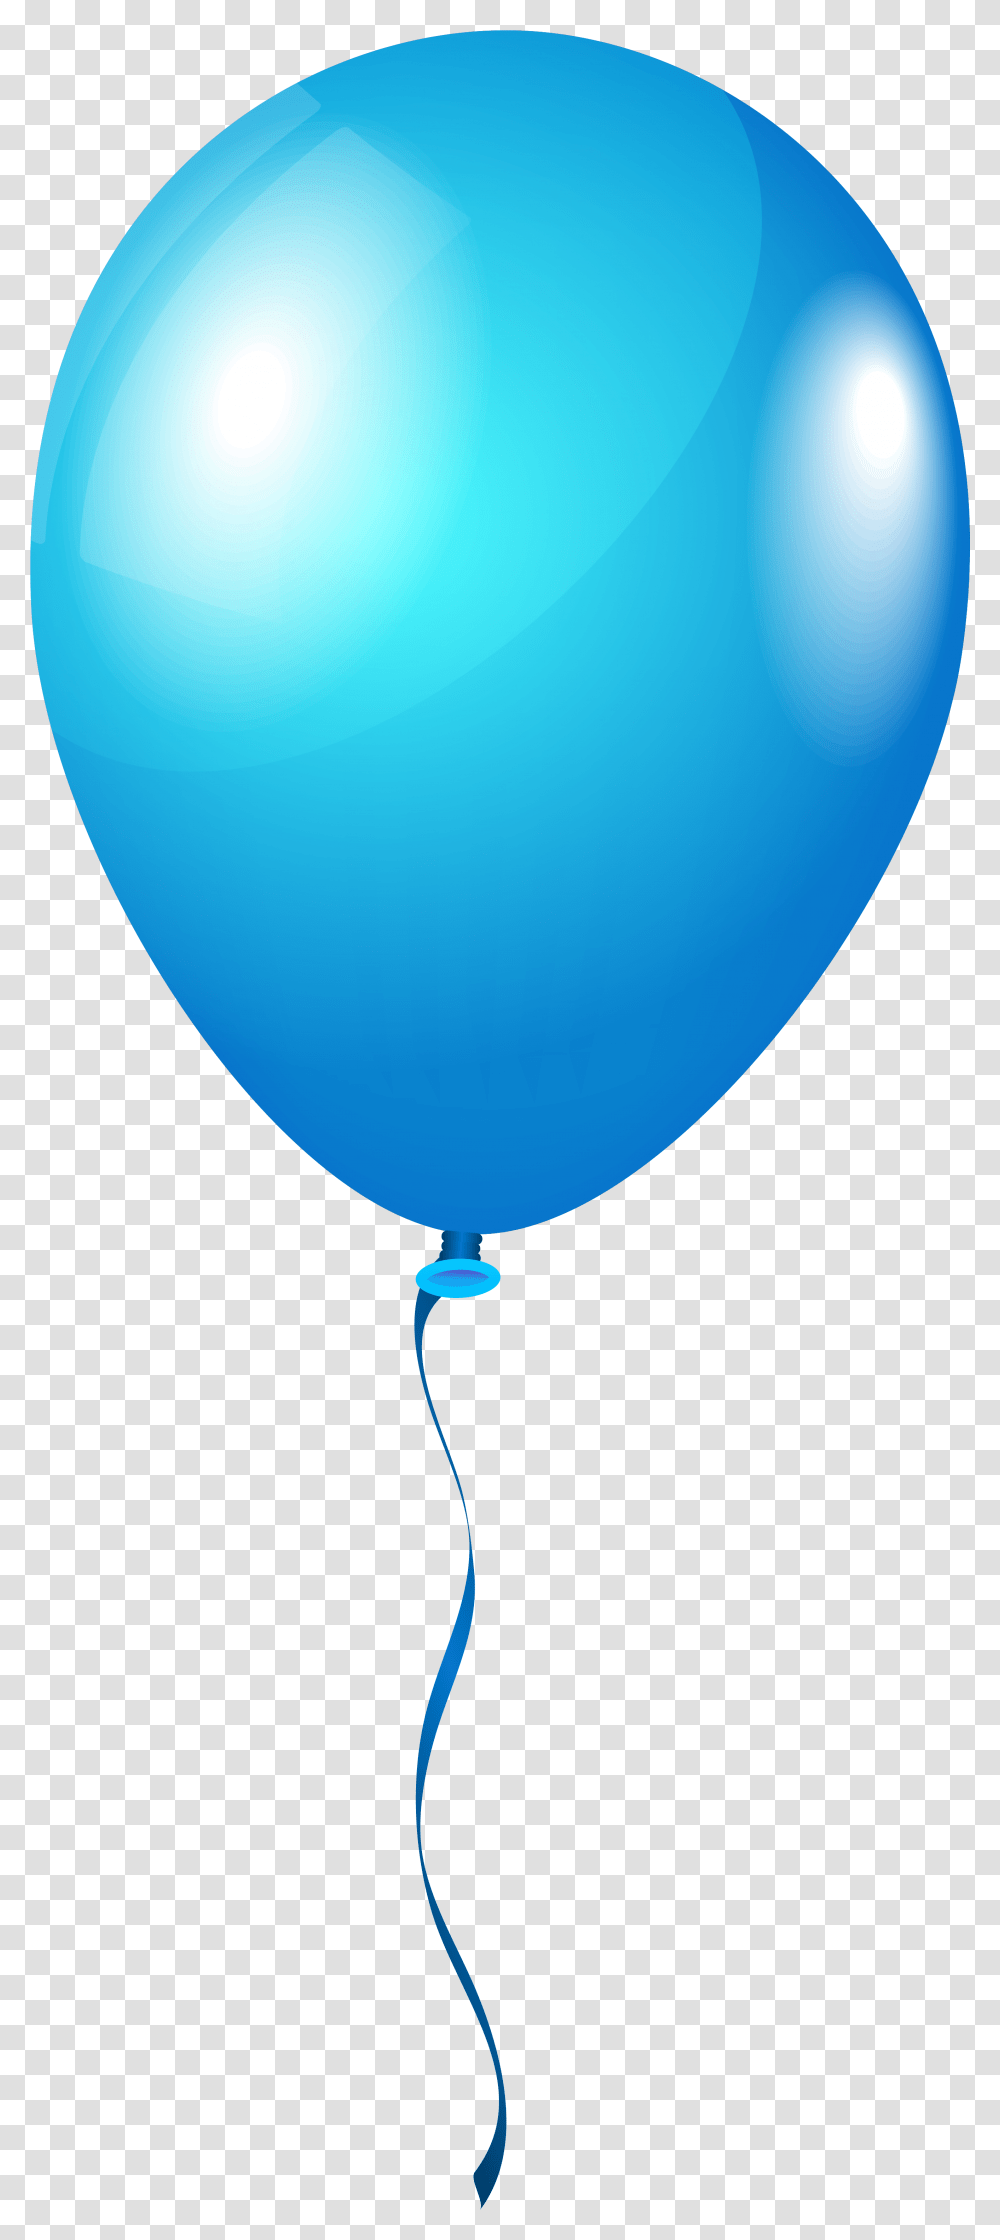 Balloon Image Background Blue Balloon Transparent Png